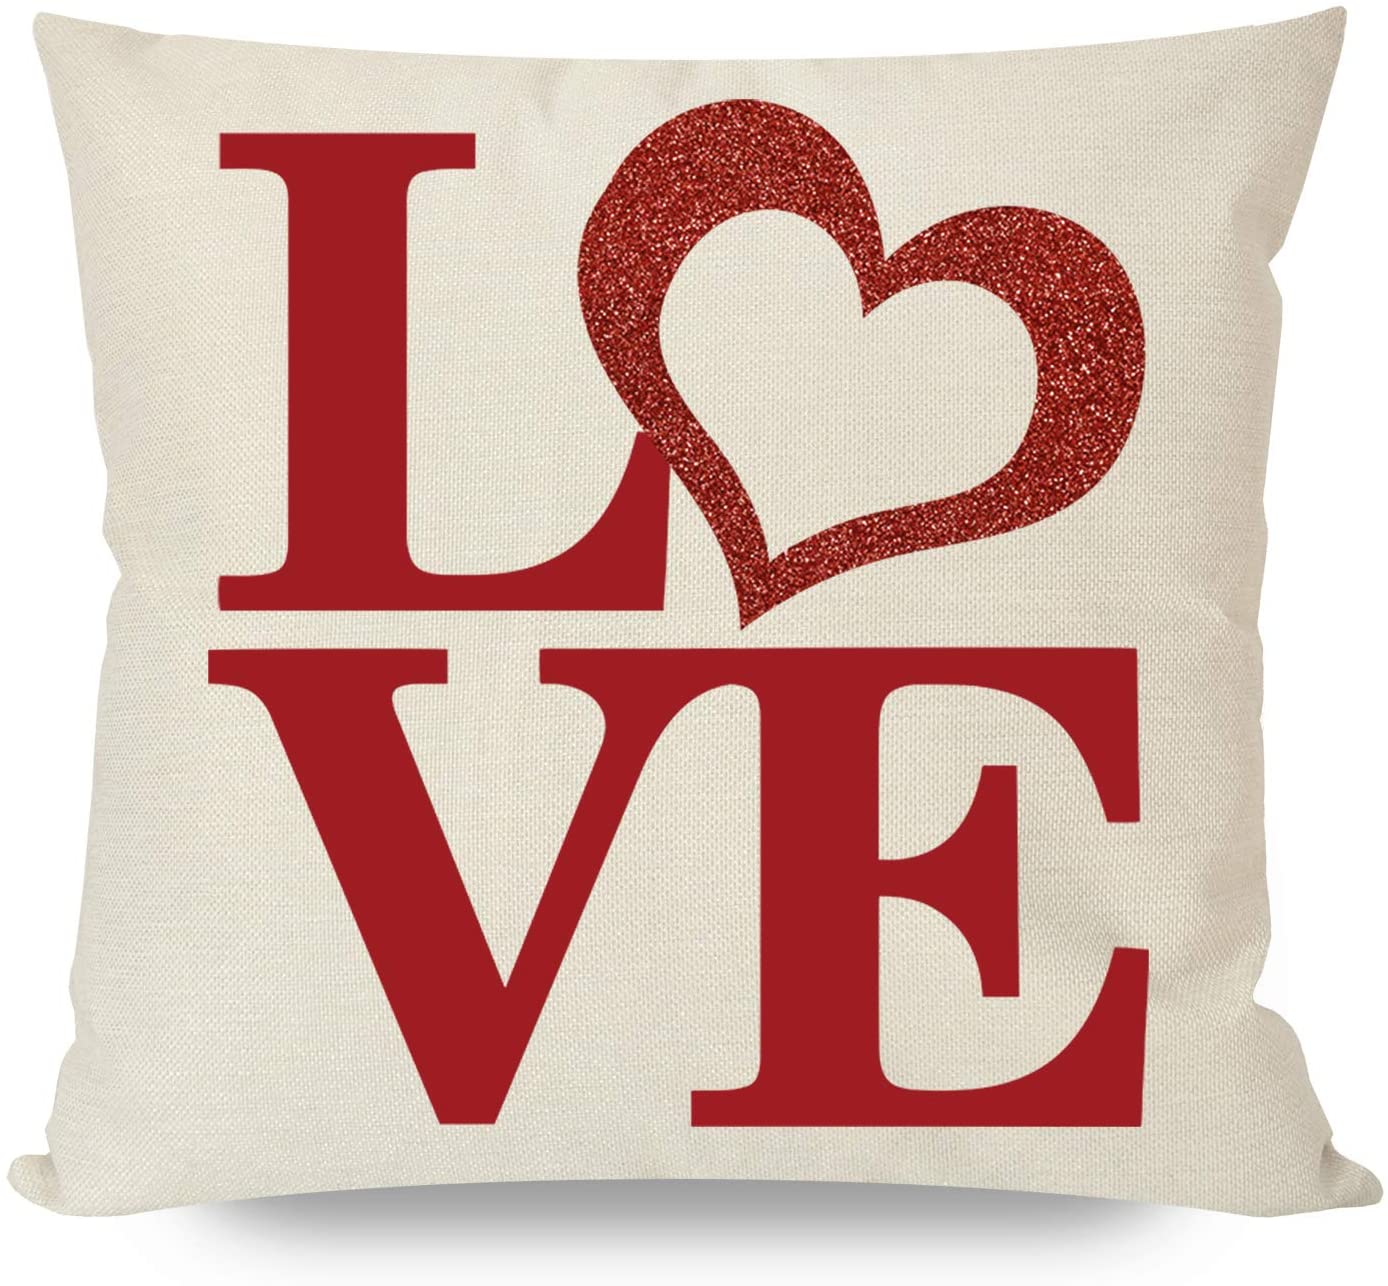 Home Brilliant Valentines Pillow Covers 18x18 Decorative Linen Square Red  Throw Pillows for Couch Bed Living Room, 18 x 18 inch(45x45cm), Burgundy